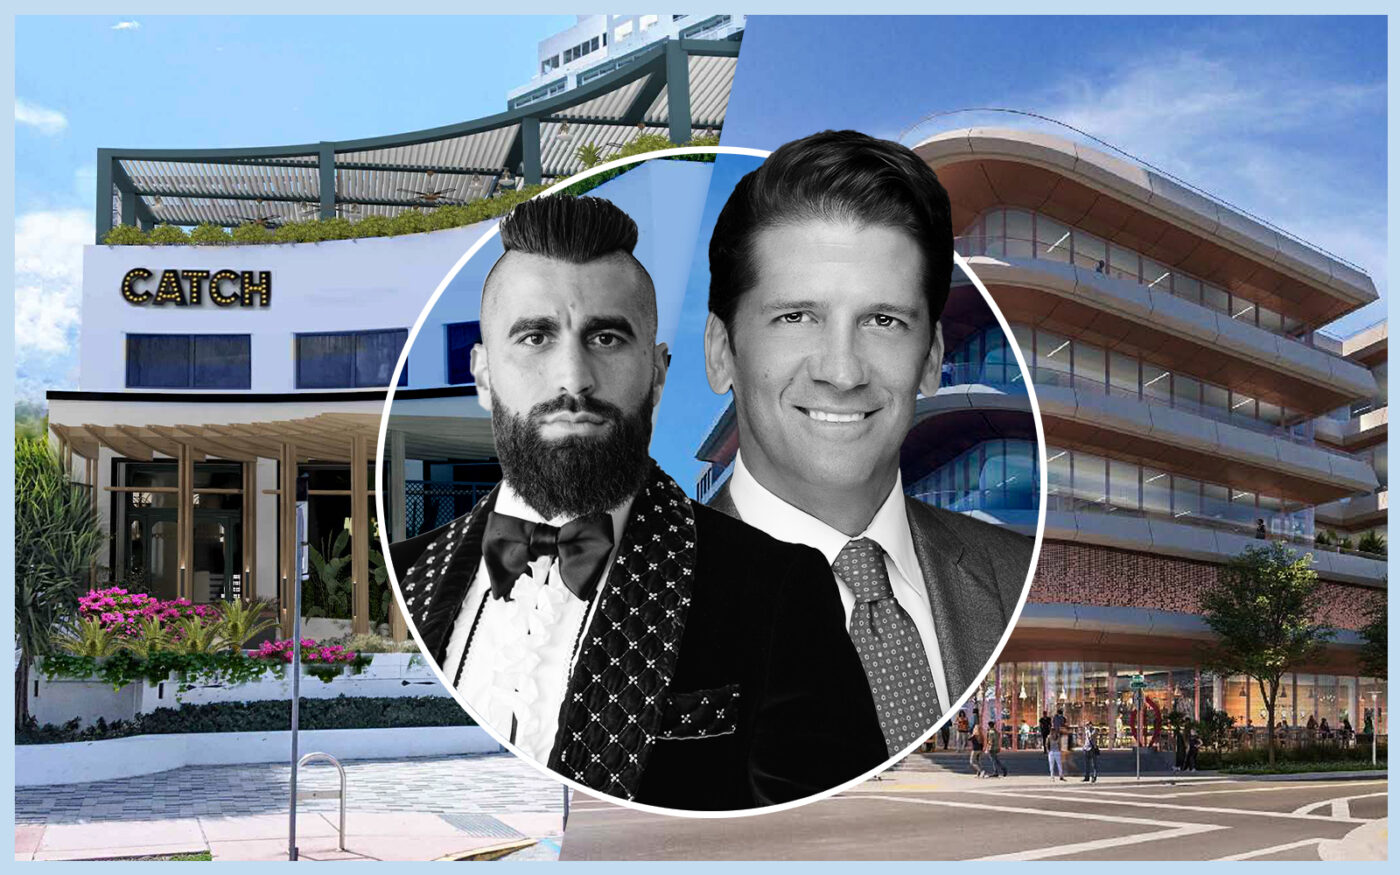 Rendering of Catch restaurant with Black Lion's Robert Rivani and a rendering of the Sunset Harbor mixed-use project with Boich Investment’s Wayne Boich